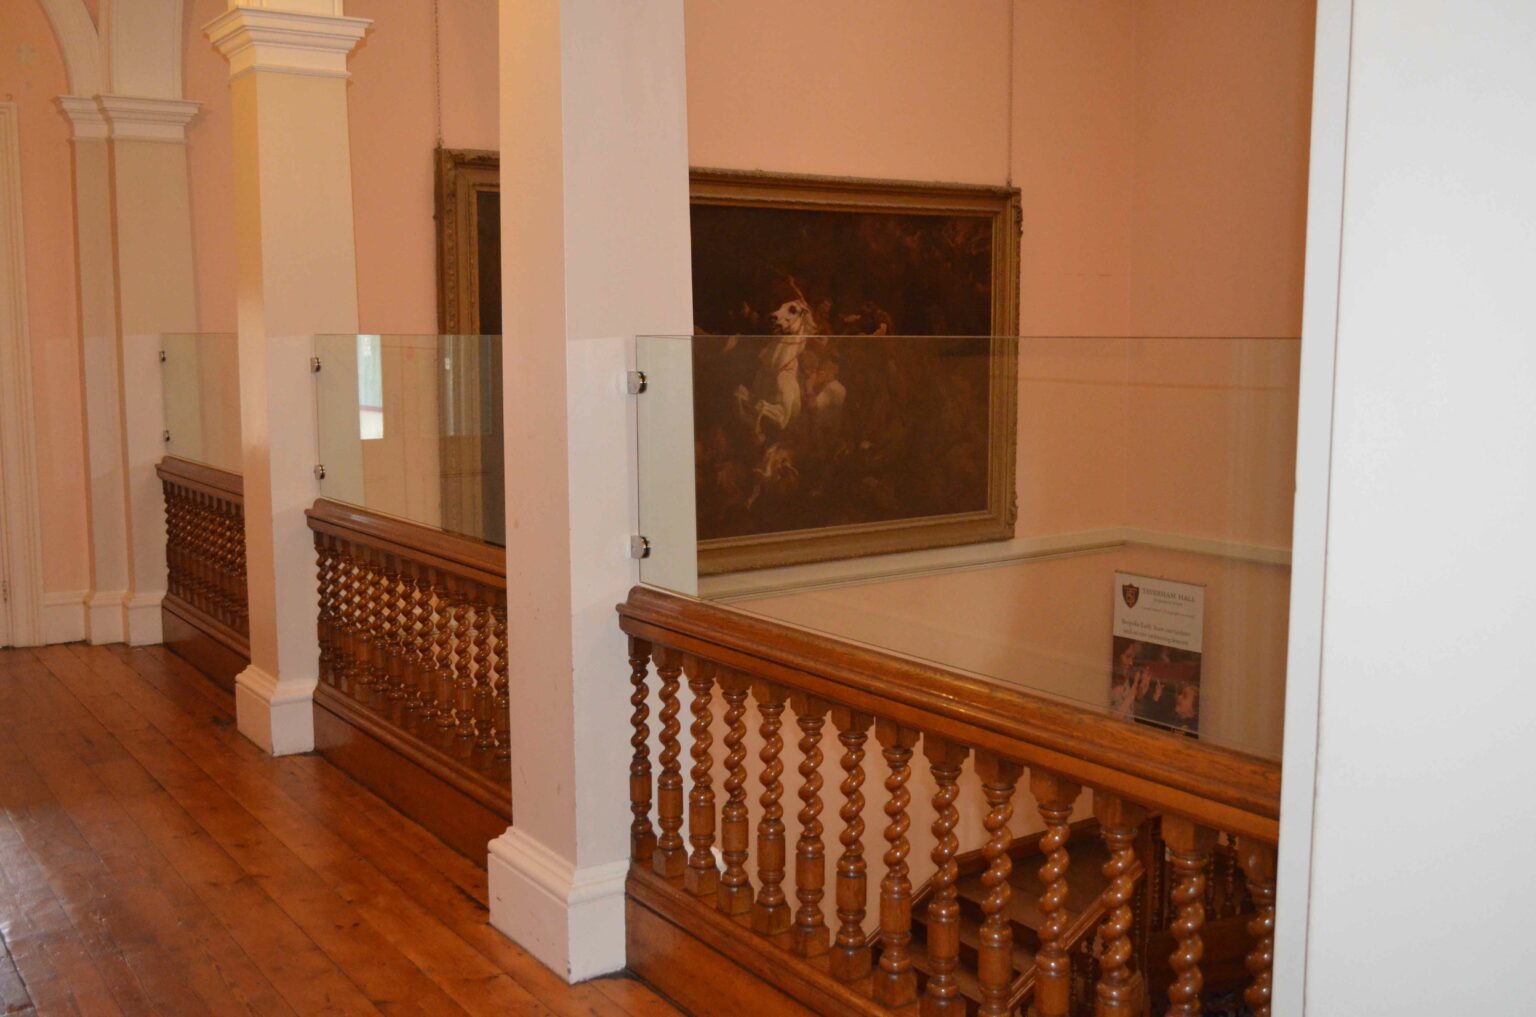 glass balustrades installed along staircase in art gallery